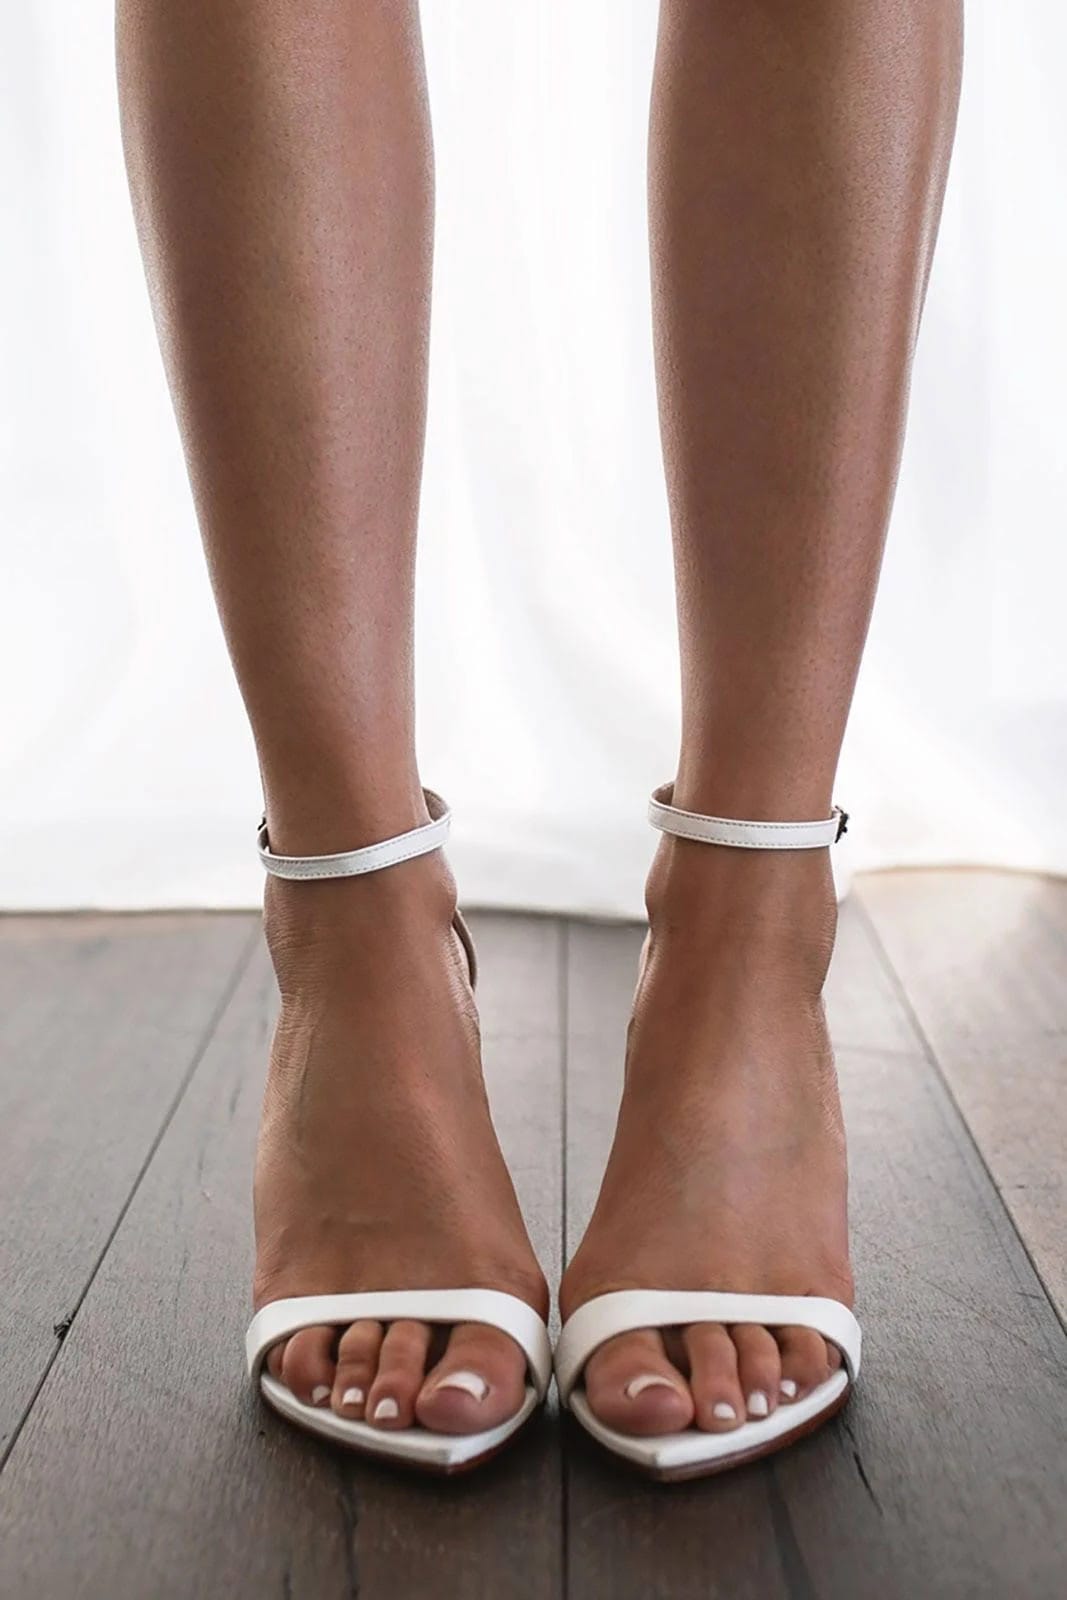 Grace Loves Lace Dosa Heels - White with a Cushioned Insole and 8.5cm Heel | Image